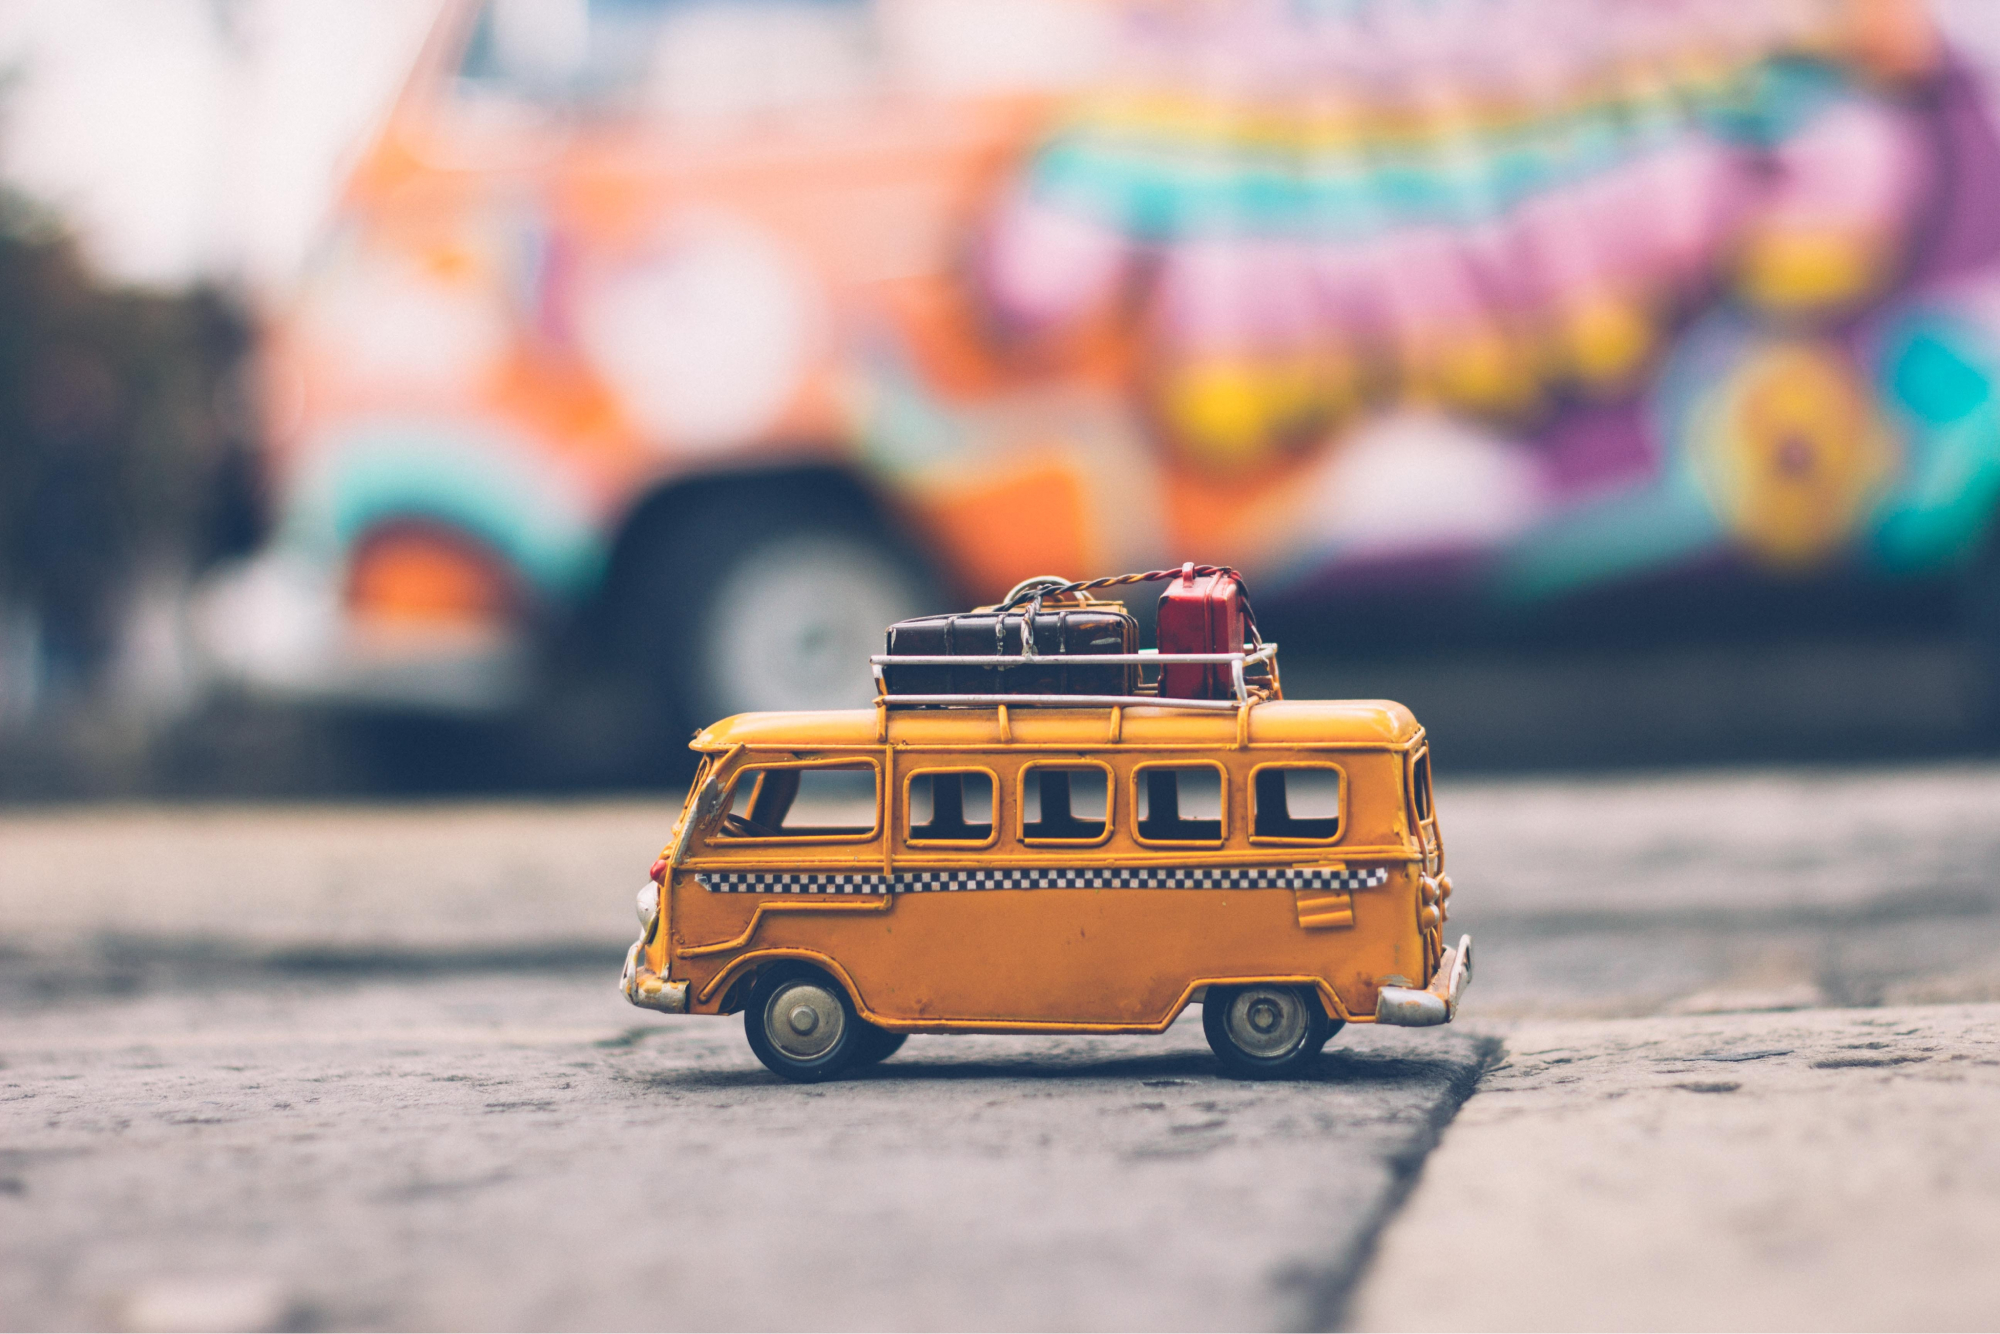 Miniature yellow bus zoomed in with large colorful blurred bus in the background 